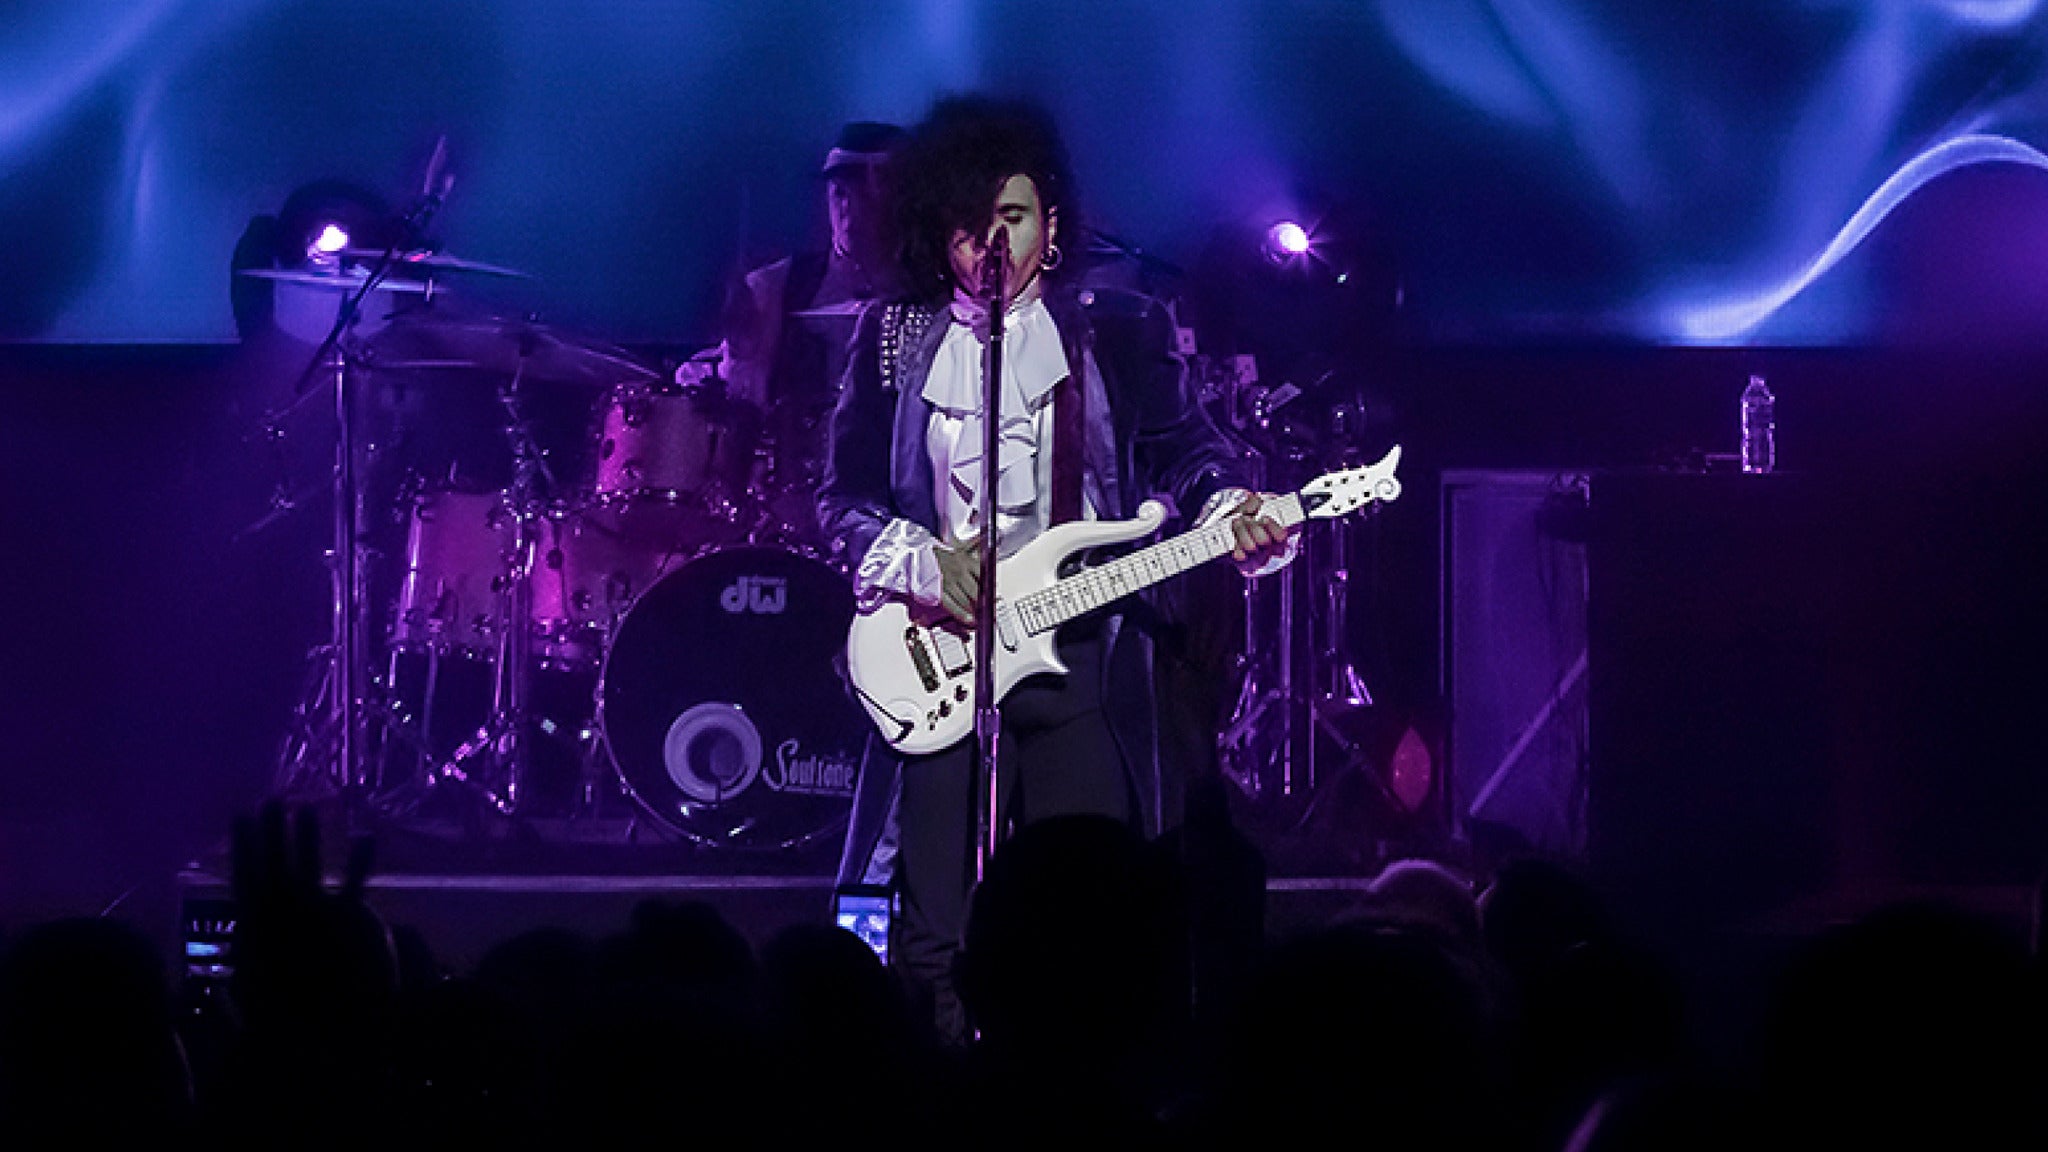 members only presale code for The Prince Experience face value tickets in Louisville